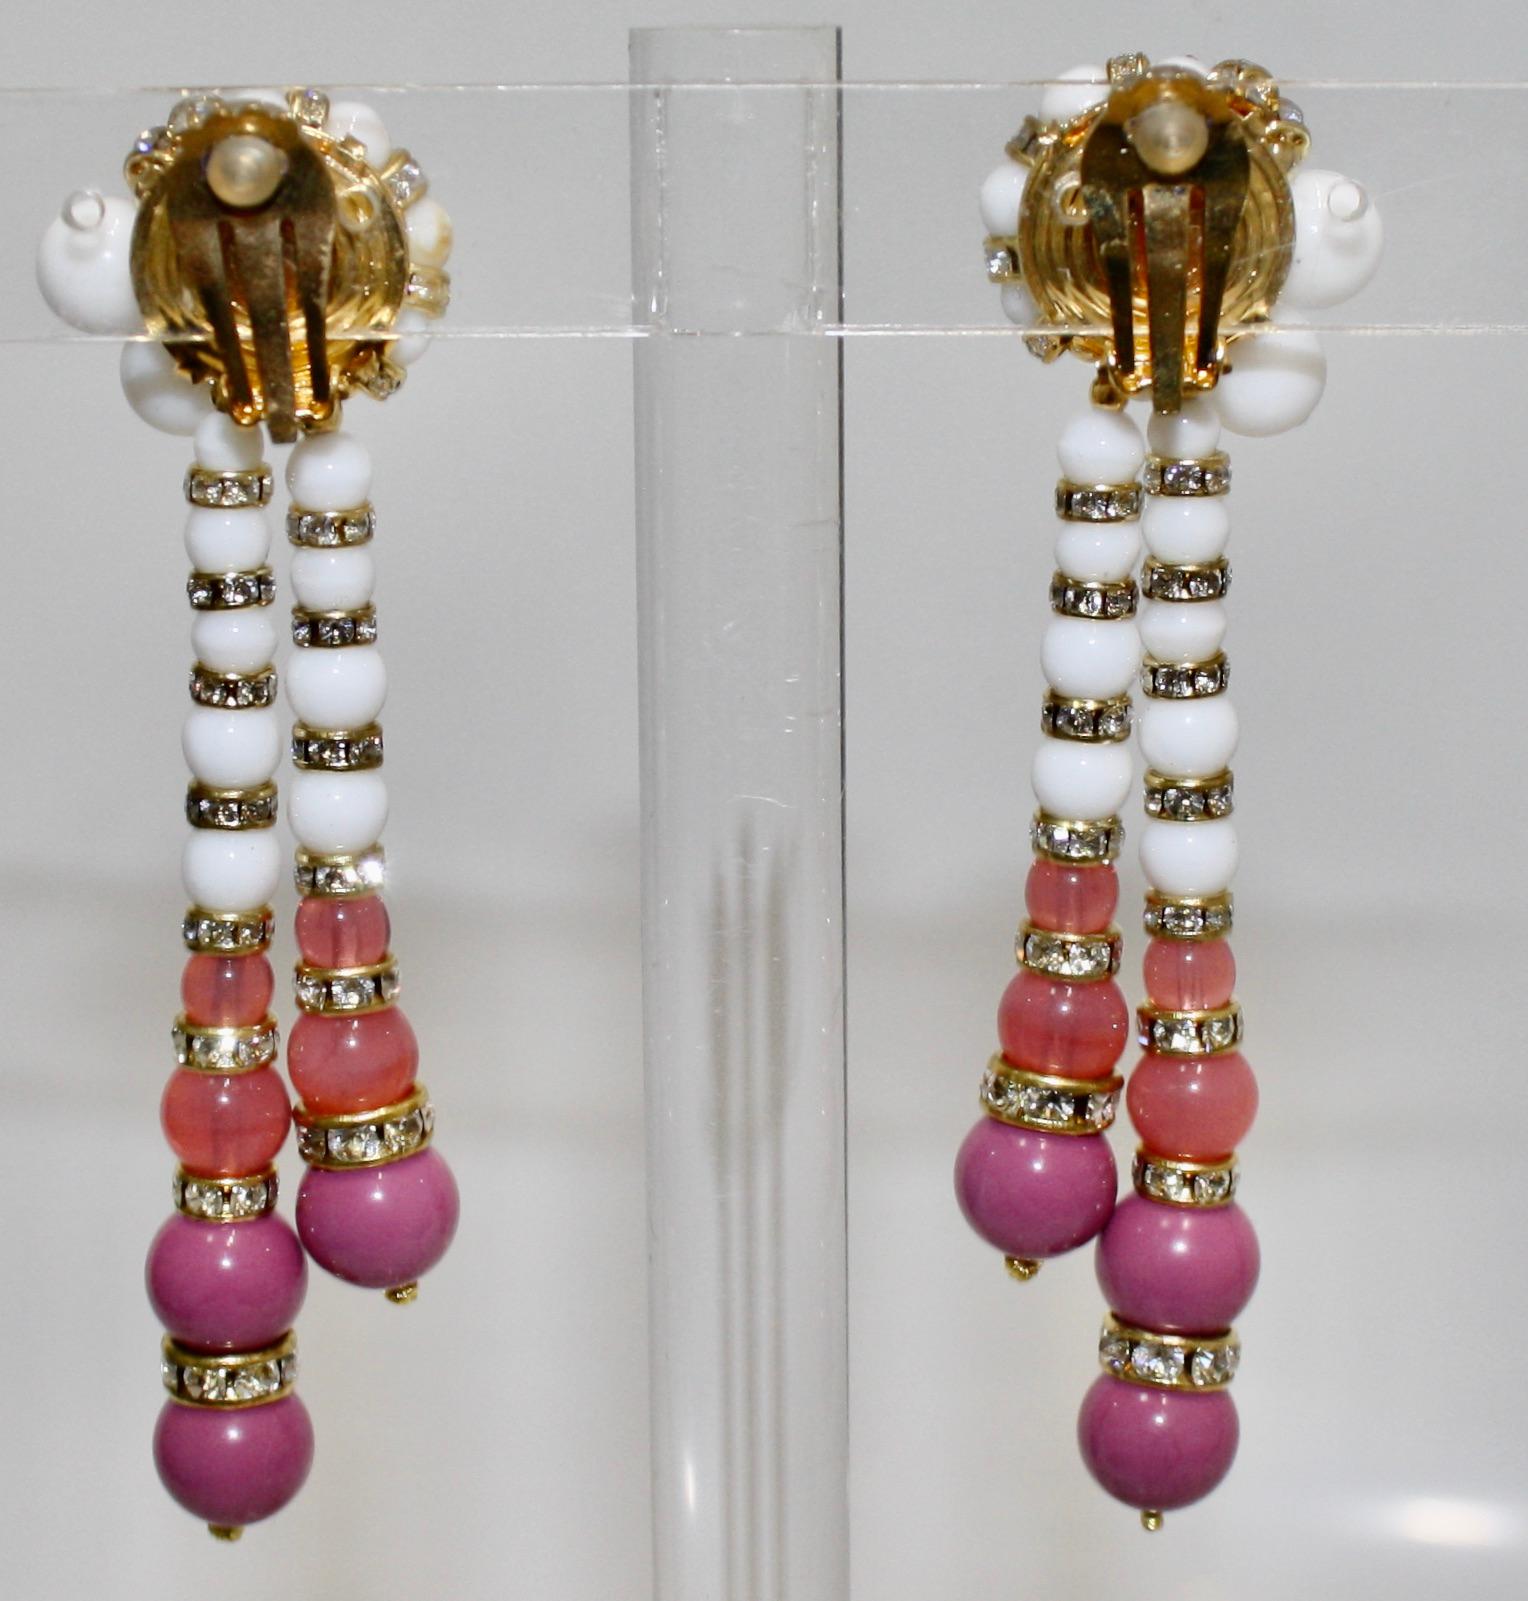 Clip earrings with a twisted design in white hand made cabochons and gold Swarovski crystal . 2 strands of the glass cabochons in white and rose glass pearls in graded size.
Earrings can be worn on left or right ear for a different look.